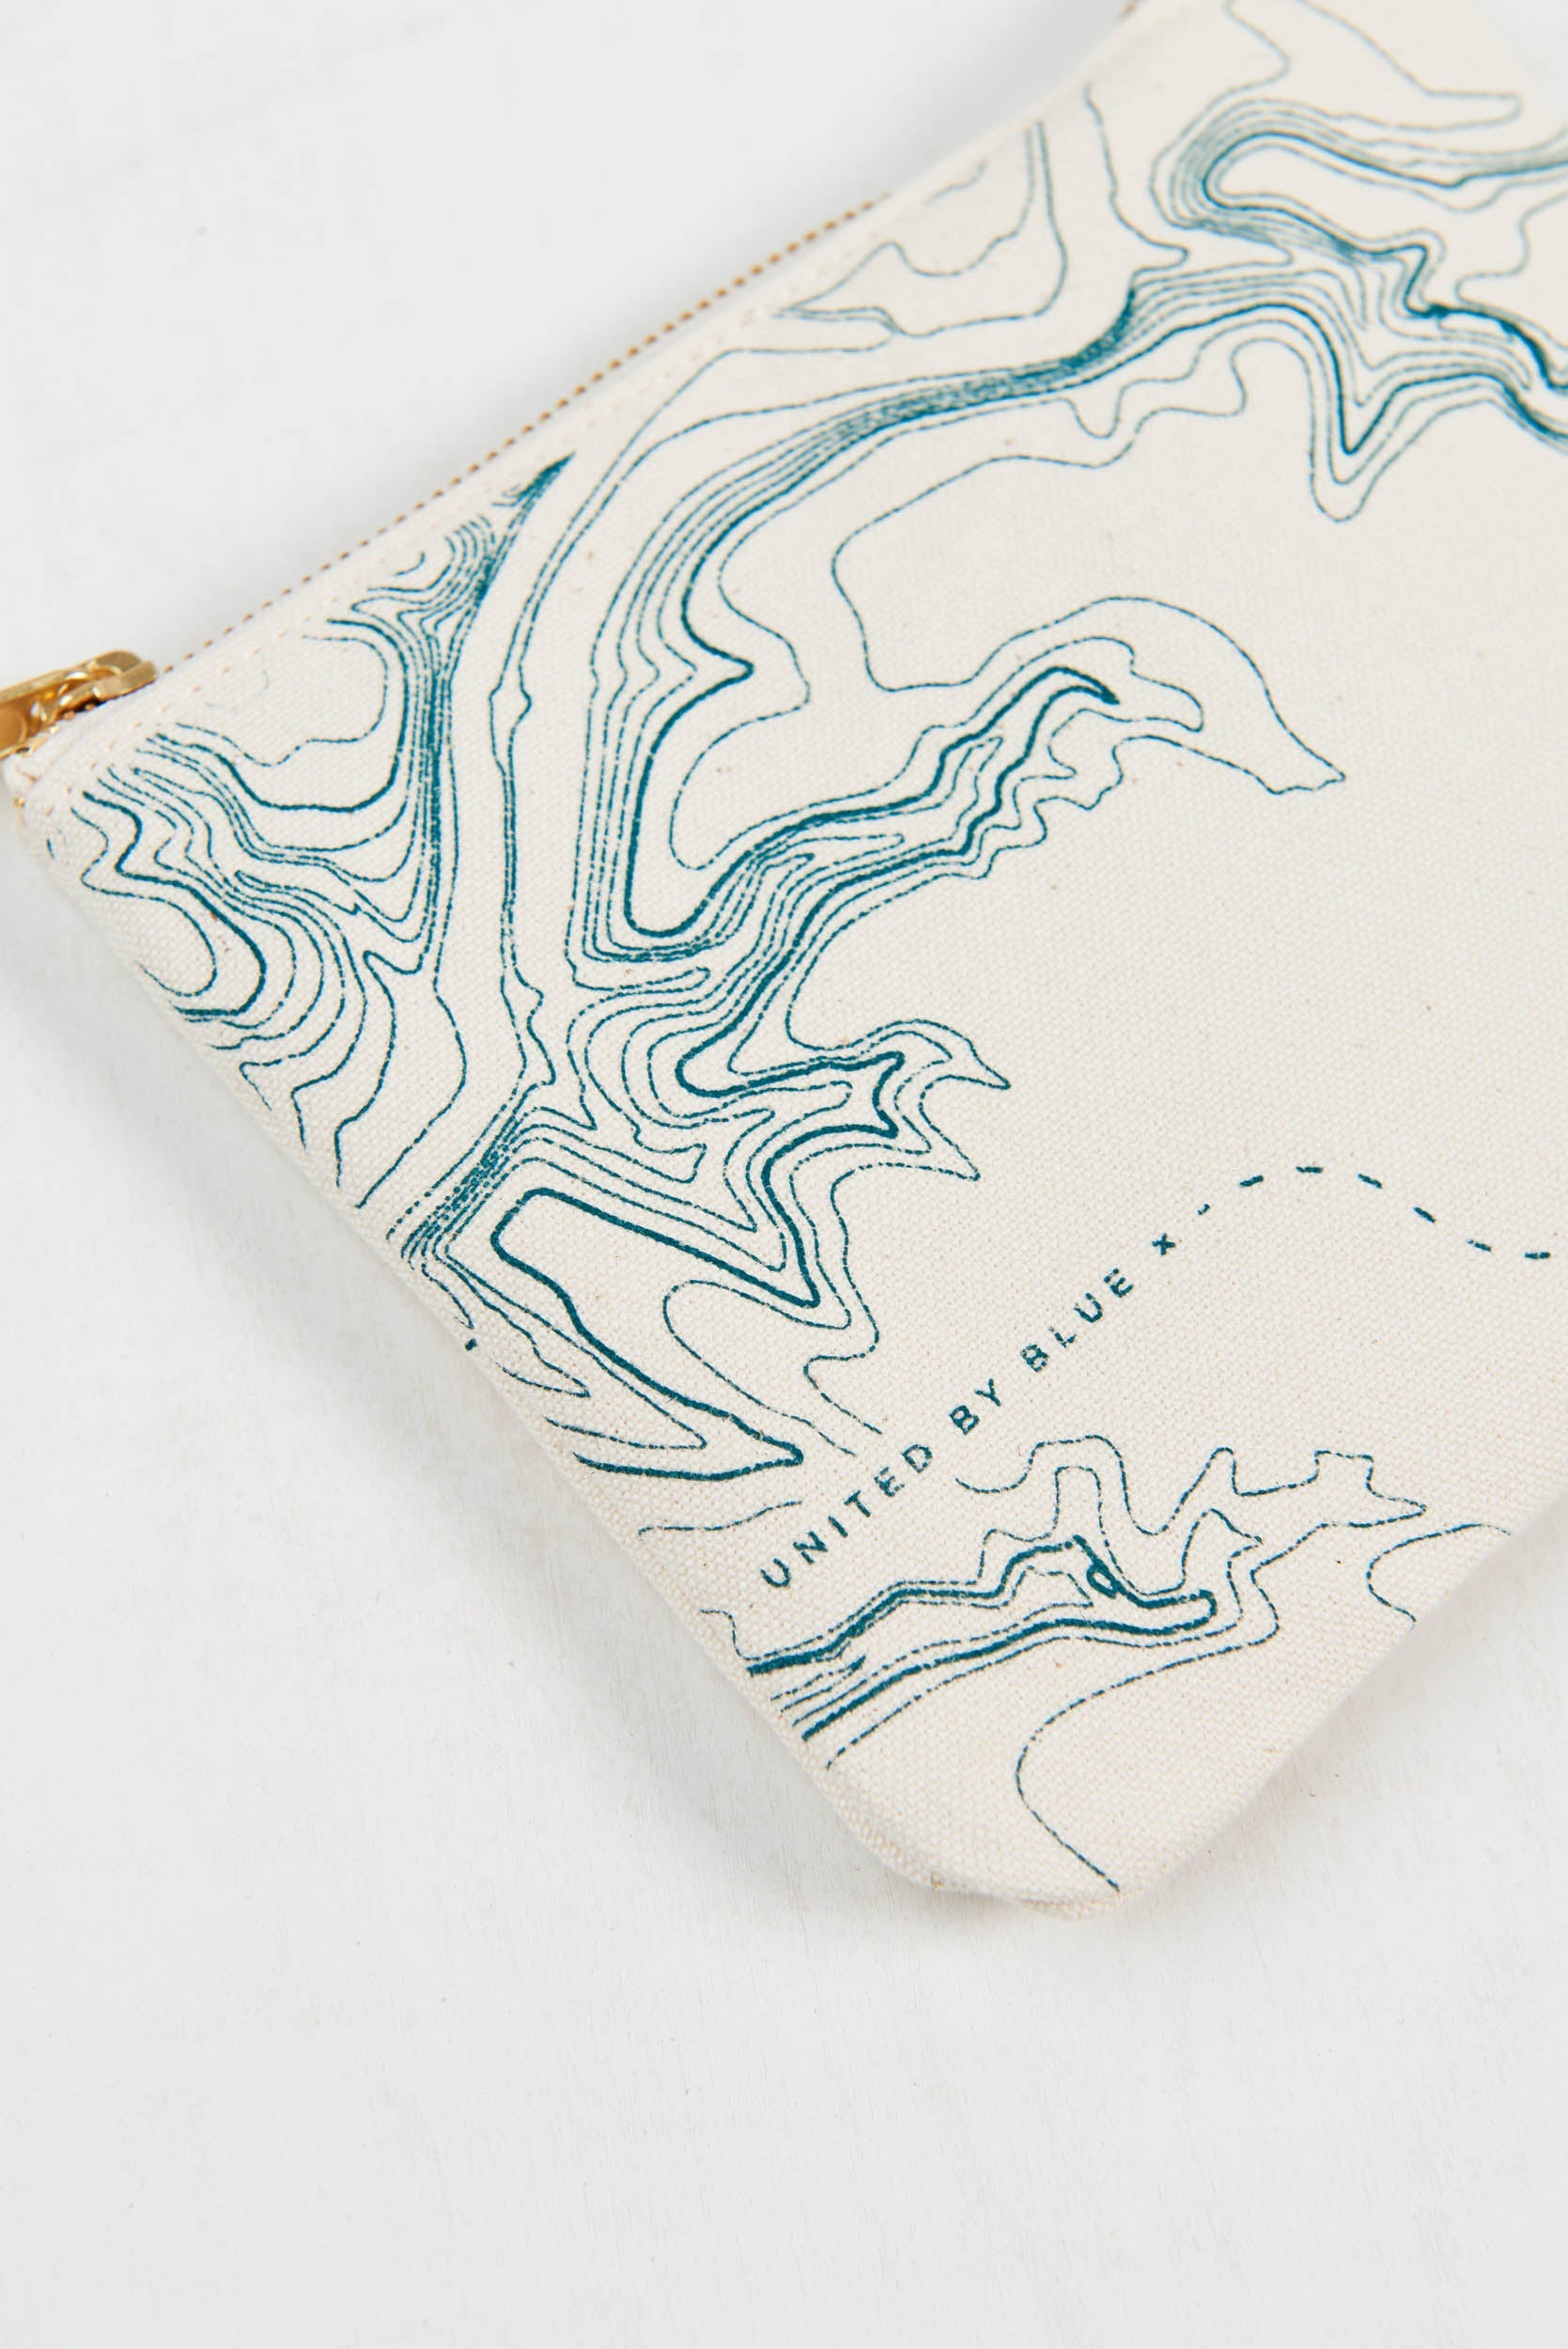 Go Forth Canvas Pouch